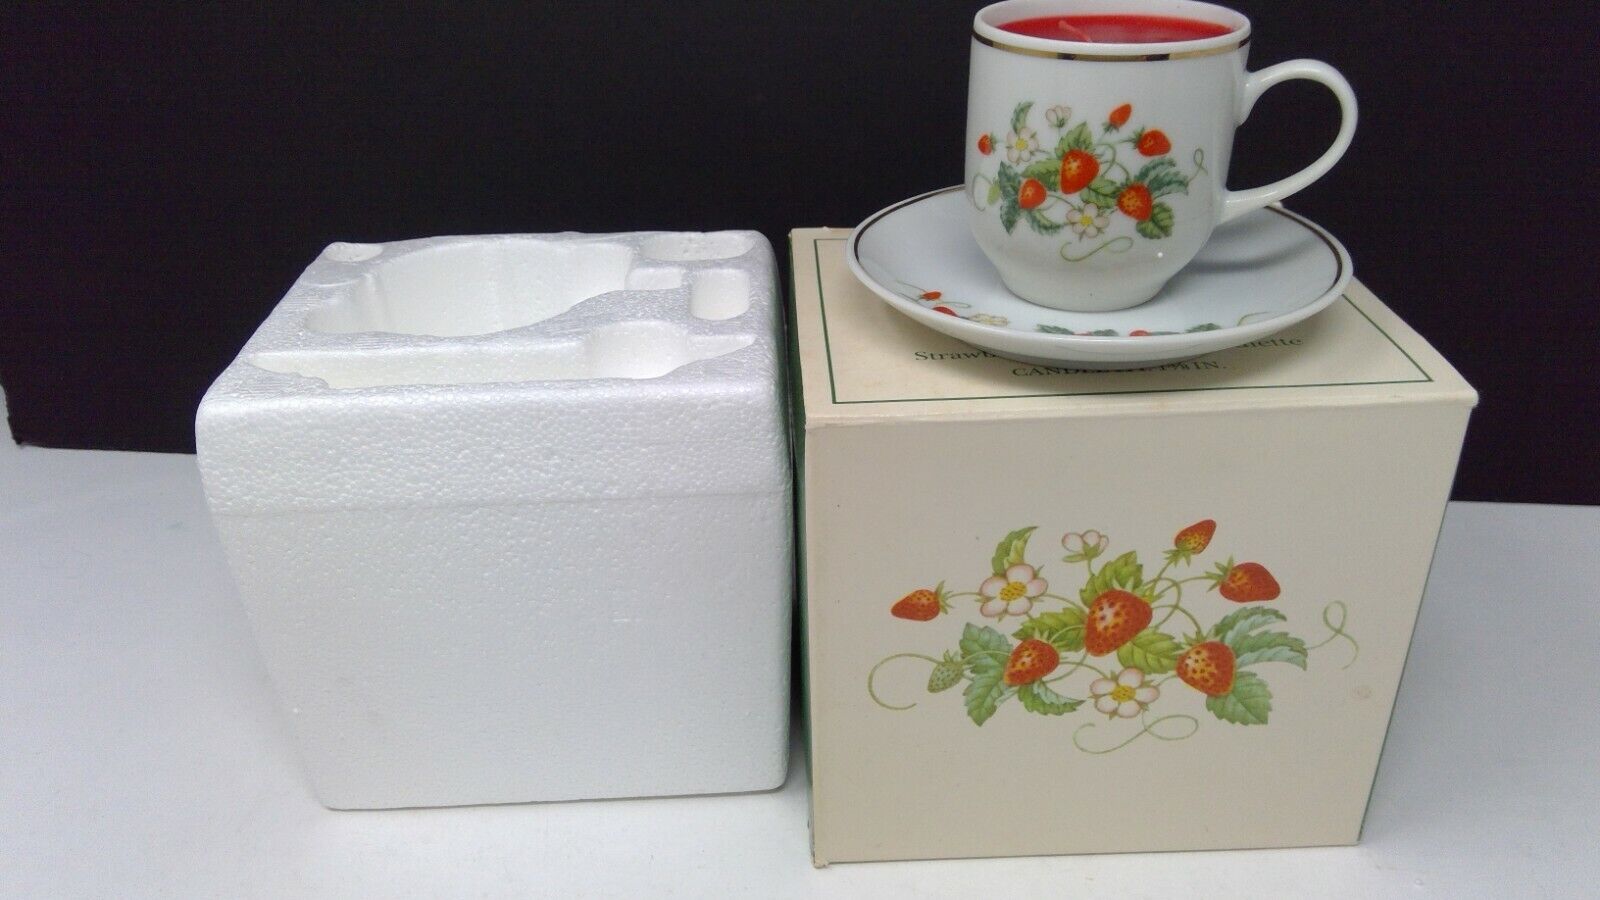 Avon 1978 Strawberry Porcelain Demitasse Cup and Saucer With Candle NIB